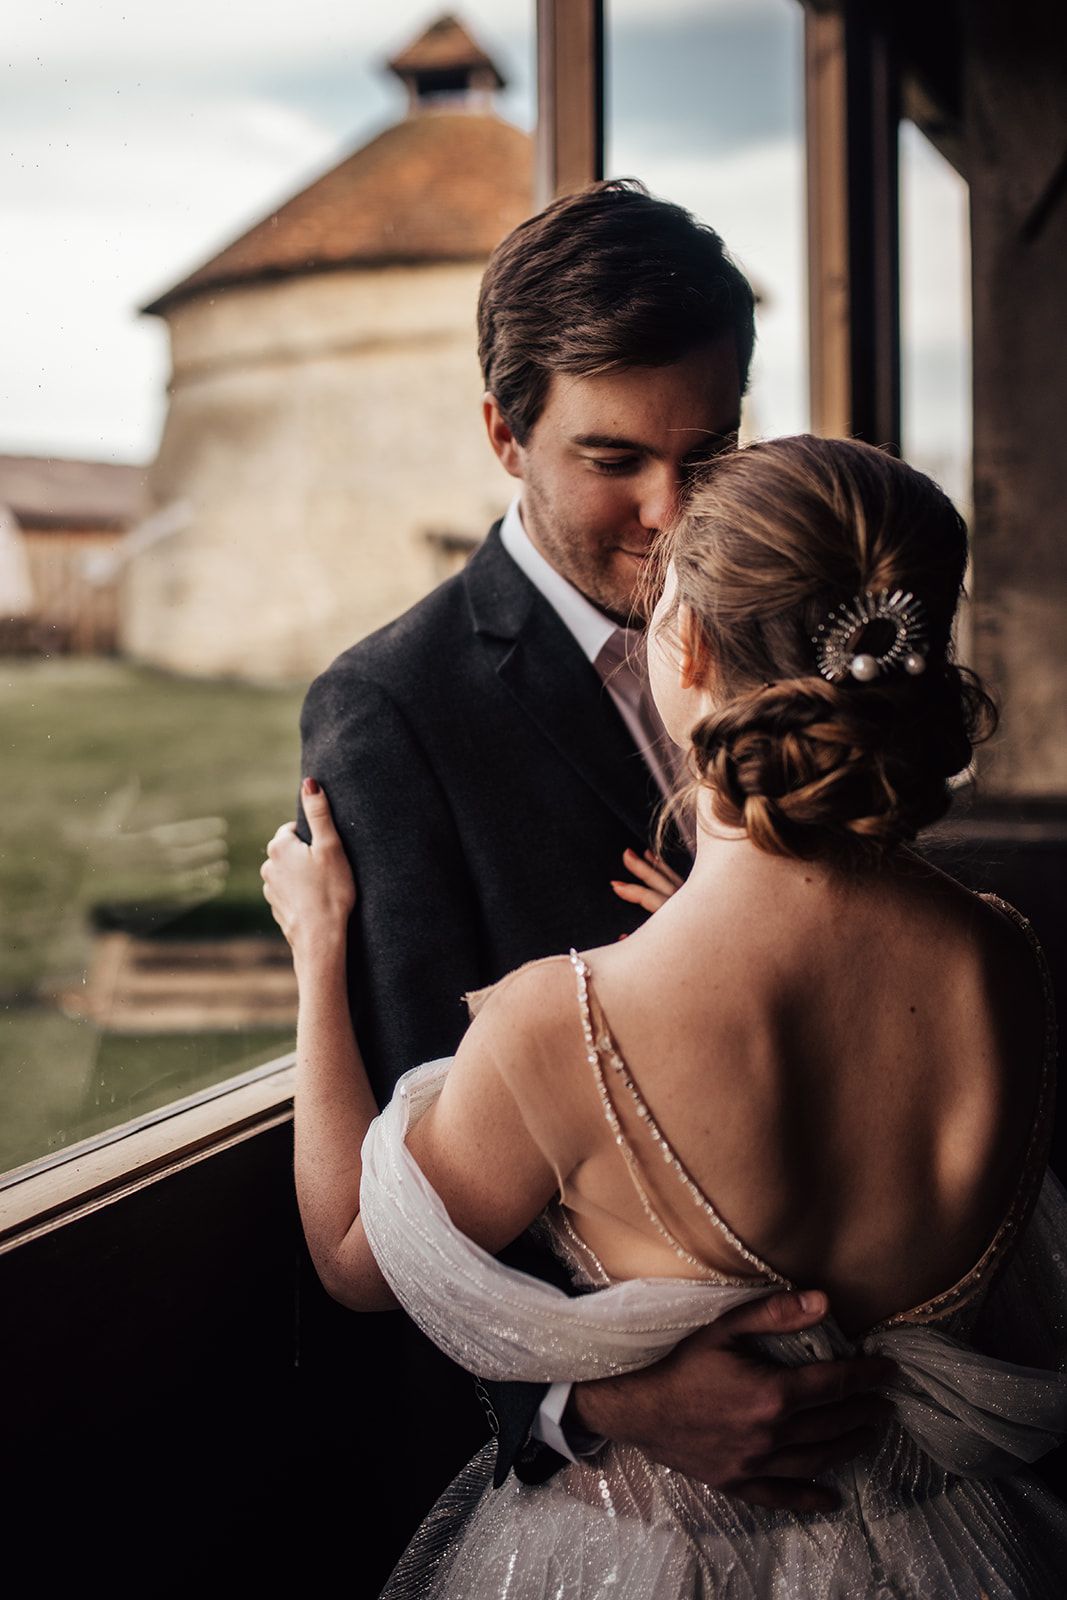 Beautiful photo from inside the barn looking out with the dovecot in the background, the newlyweds stand in the foreground looking at each other. Photo thanks to Francesca Checkley Photography.